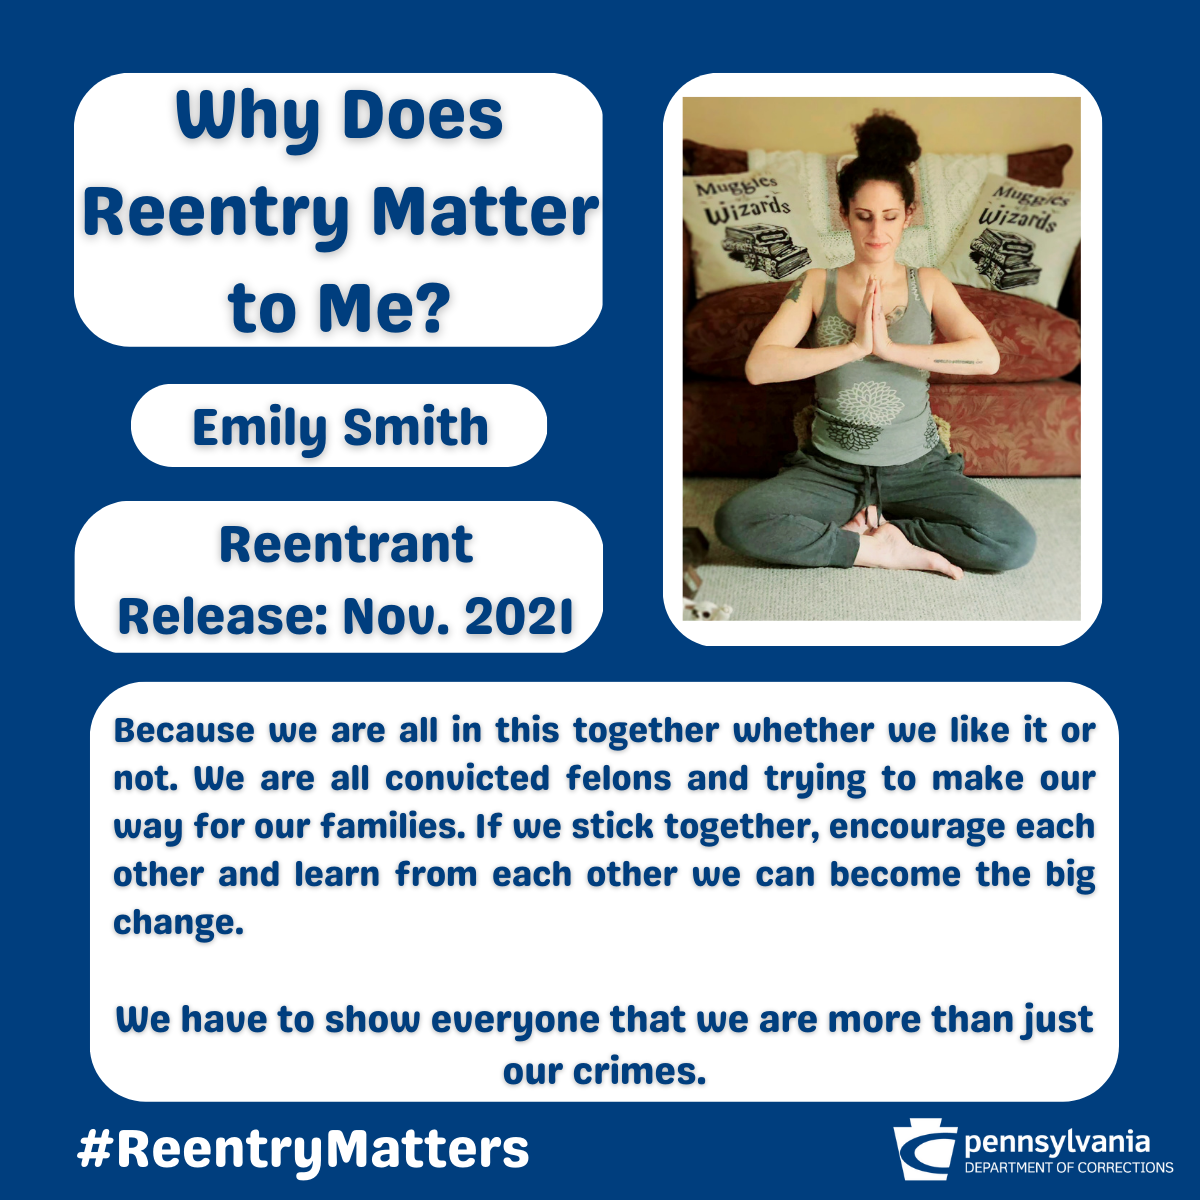 A graphic highlighting Emily Smith and featuring a picture of her doing yoga. It says "Why does reentry matter to you?" and "Emi